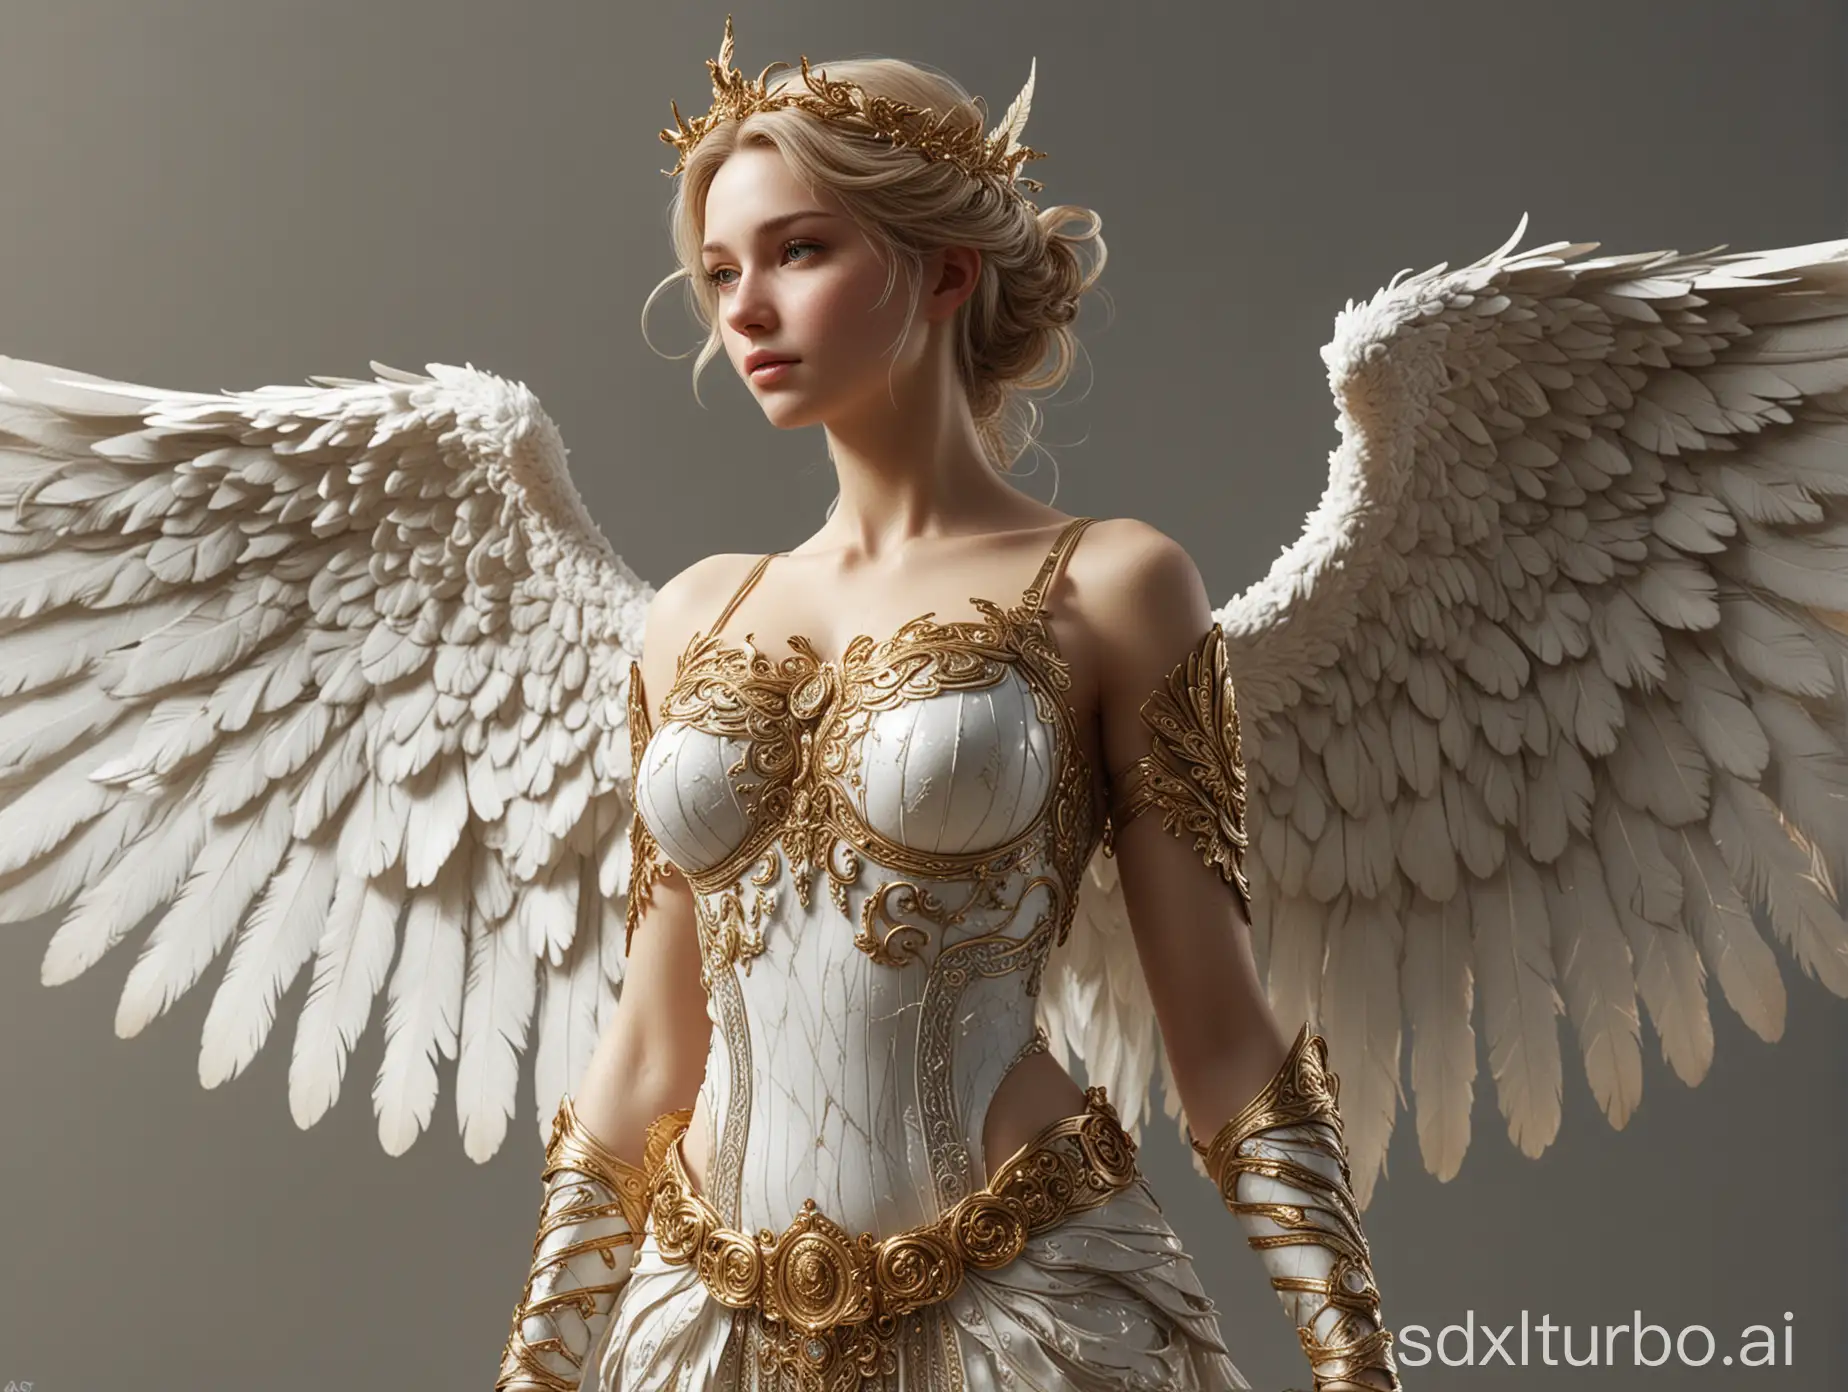 full body & RAW Photo of  a realistic magnificent detailed angel with wings from 10 meter distance, wings outstretched with gold tips on feathers, intricate ornate marble and bone interwoven and spiraling patterns, final fantasy style, super beautiful god(s) wearing translucent clothing, great at both photos and artistic feathered 8k, high resolution, detailed, realistic lighting, focus on hands/face, painterly, strong composition, award-winning with simple solid light background